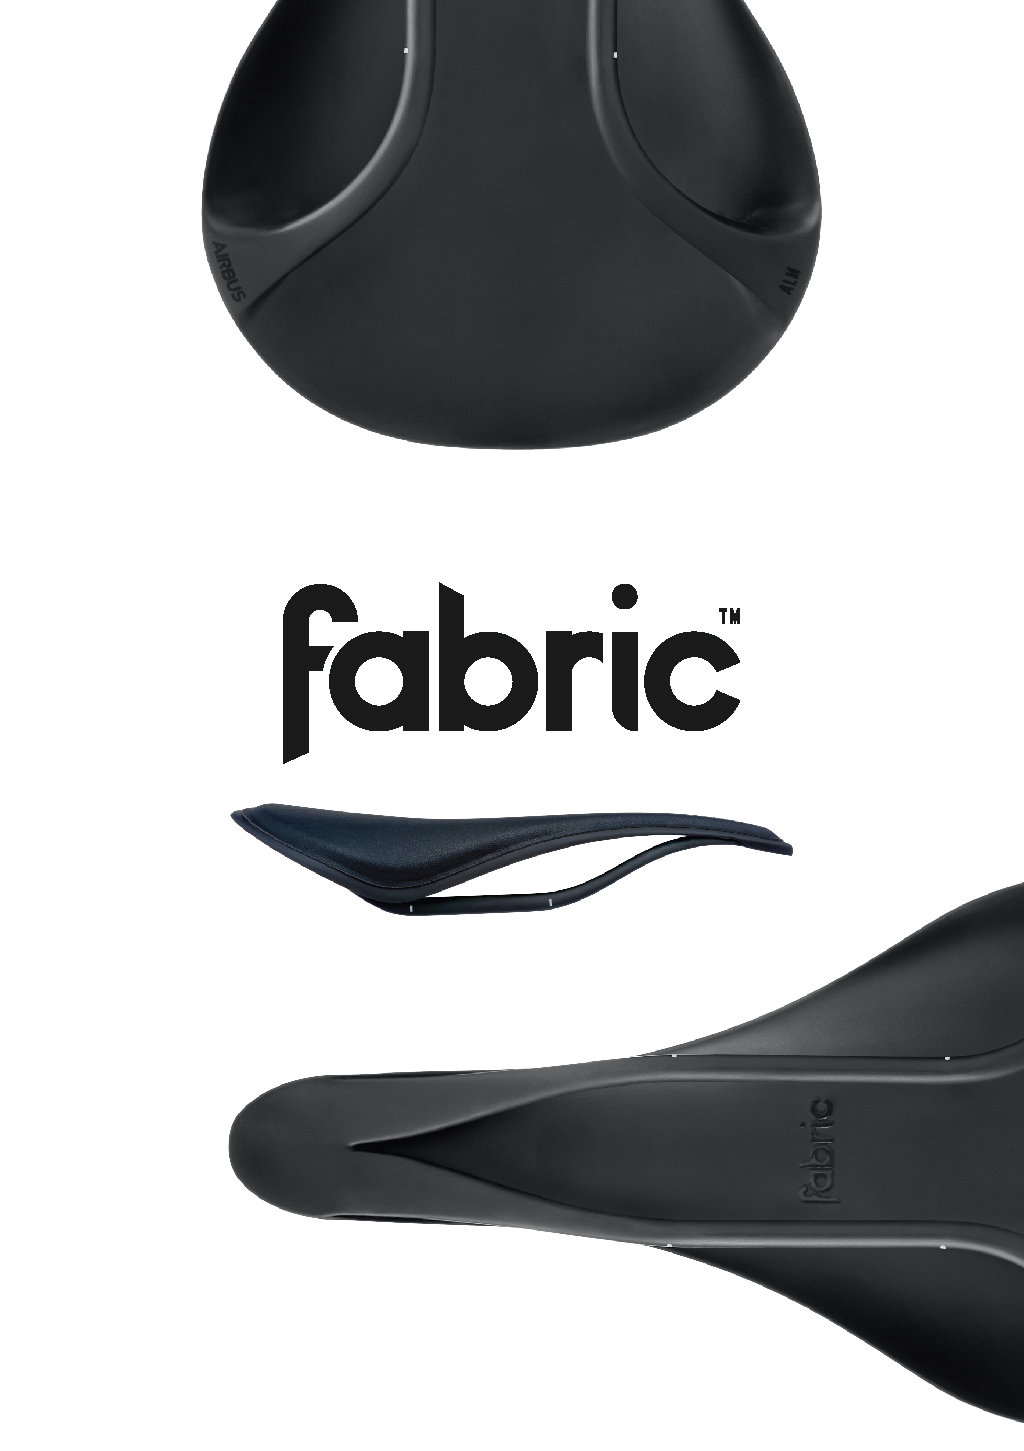 Fabric Cover Pic